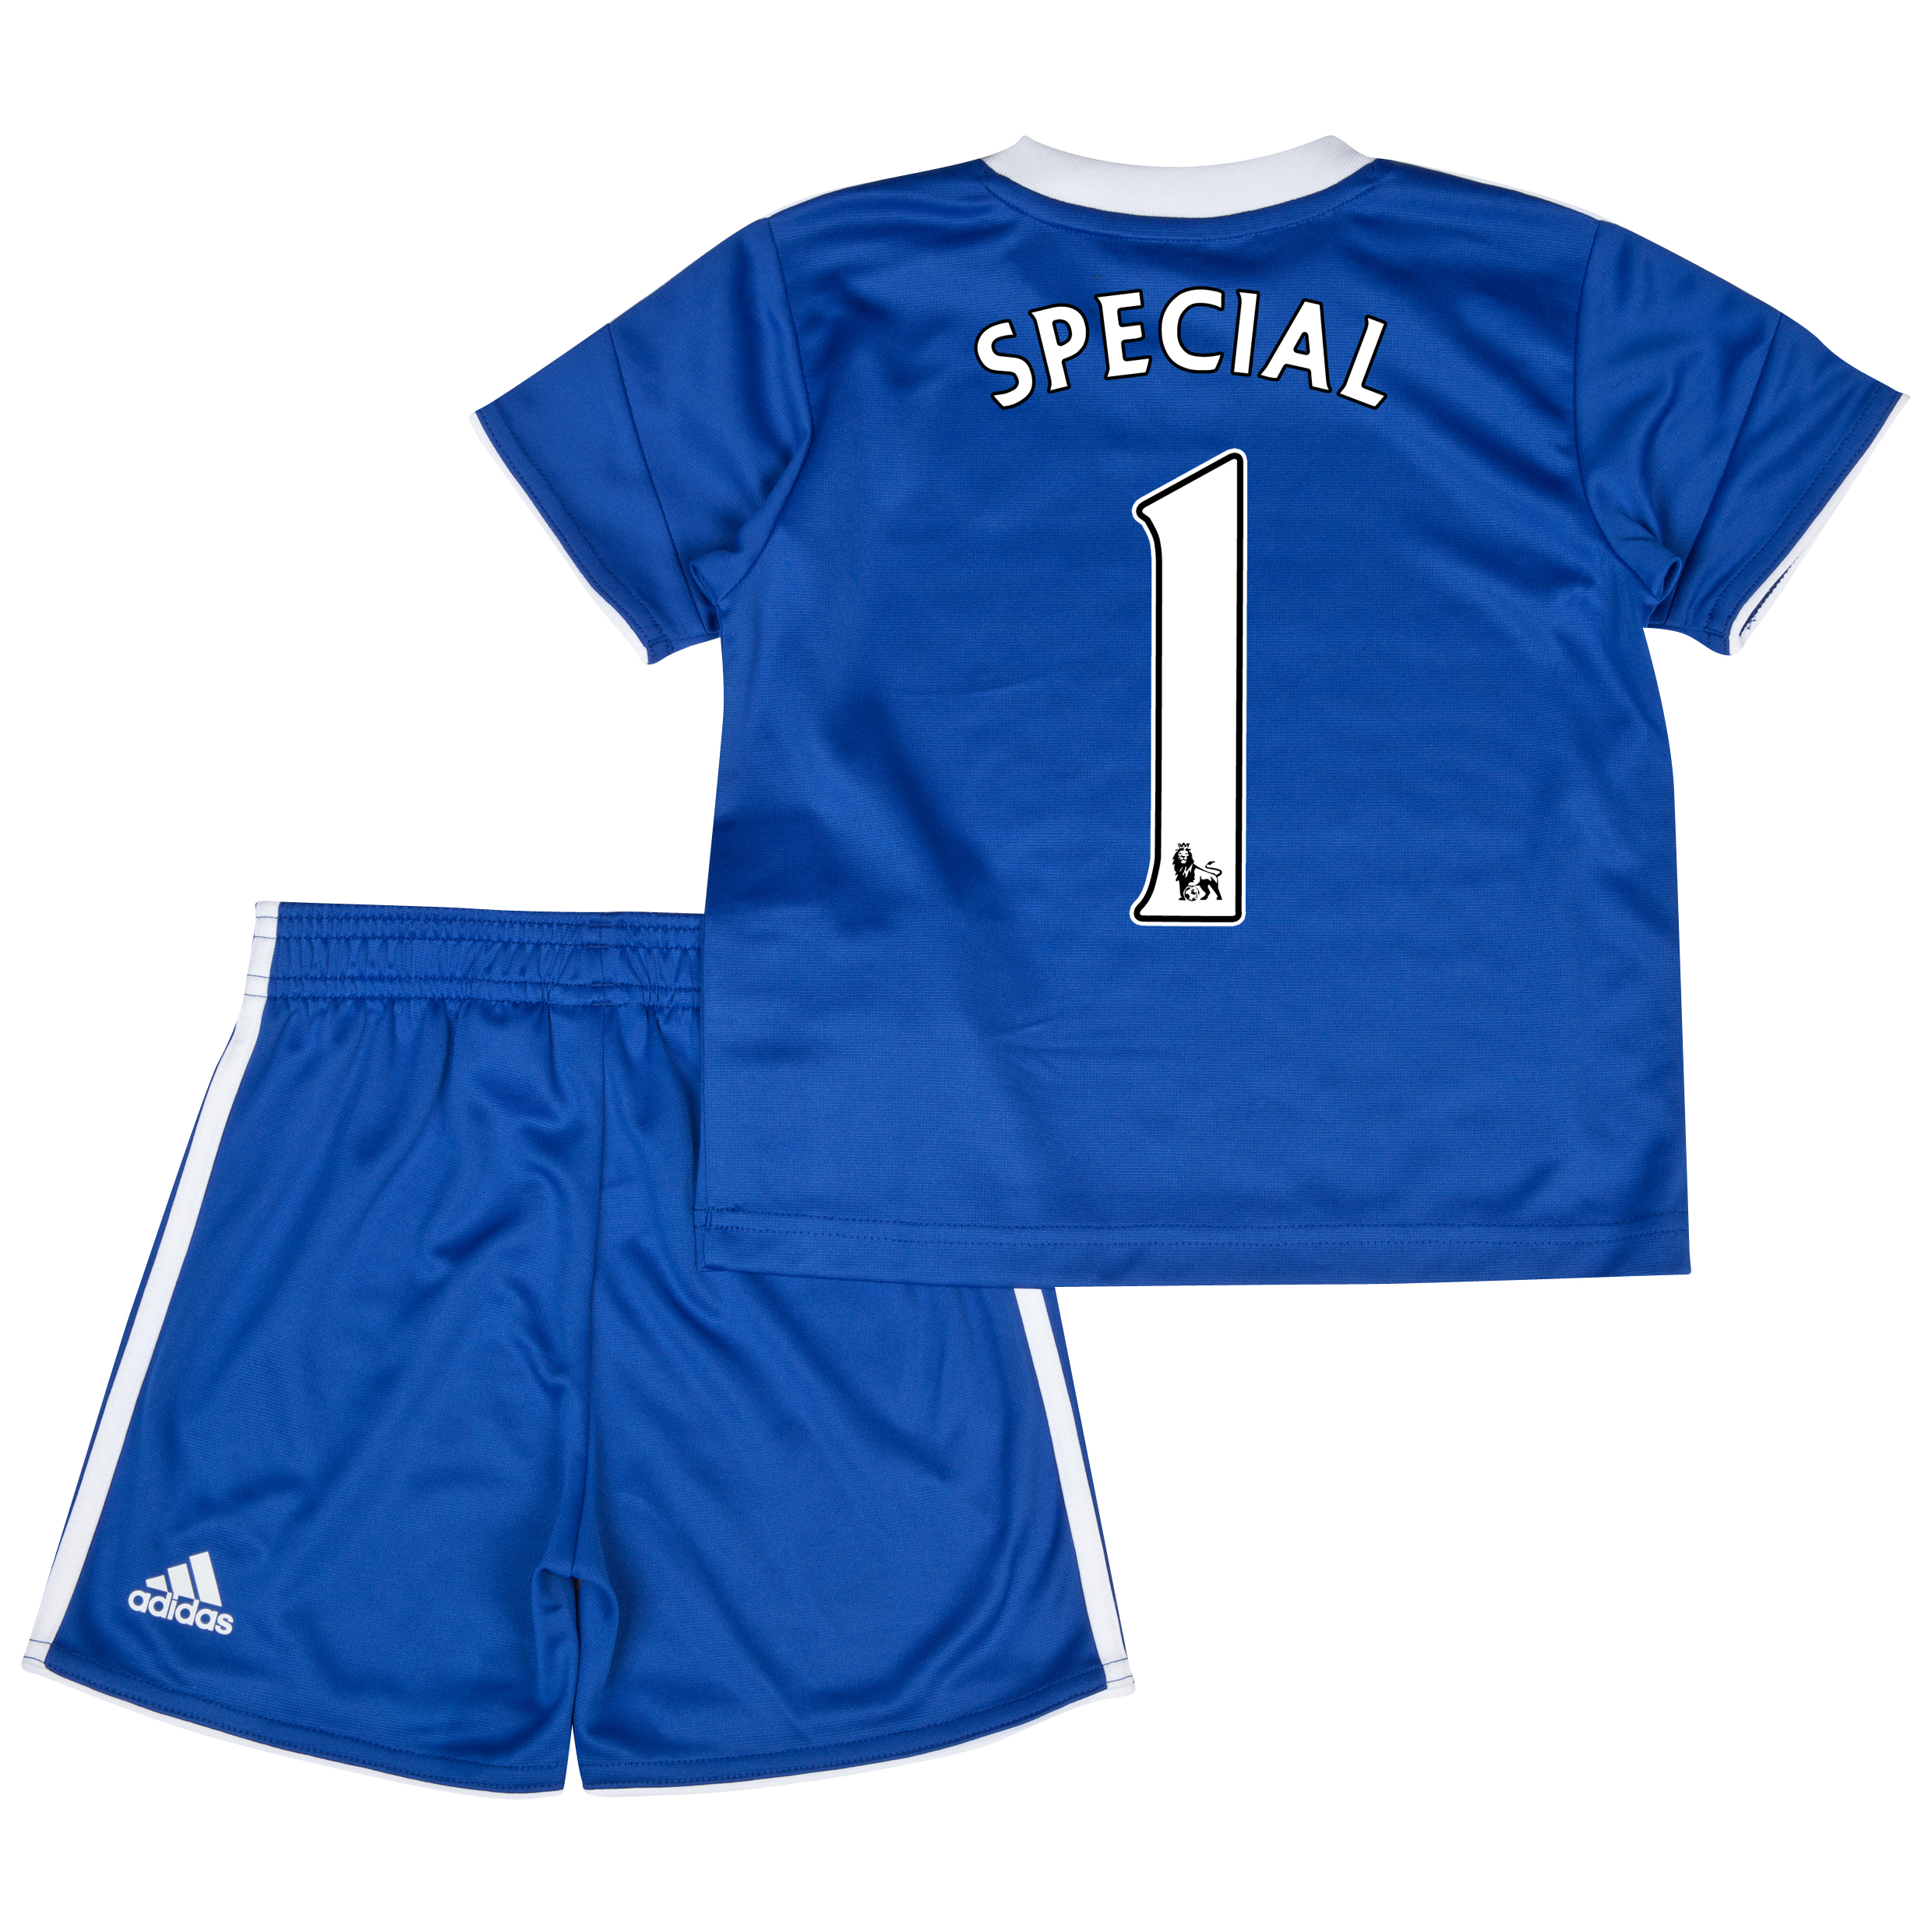 Chelsea Home Mini Kit 2013/14 with Special 1 printing